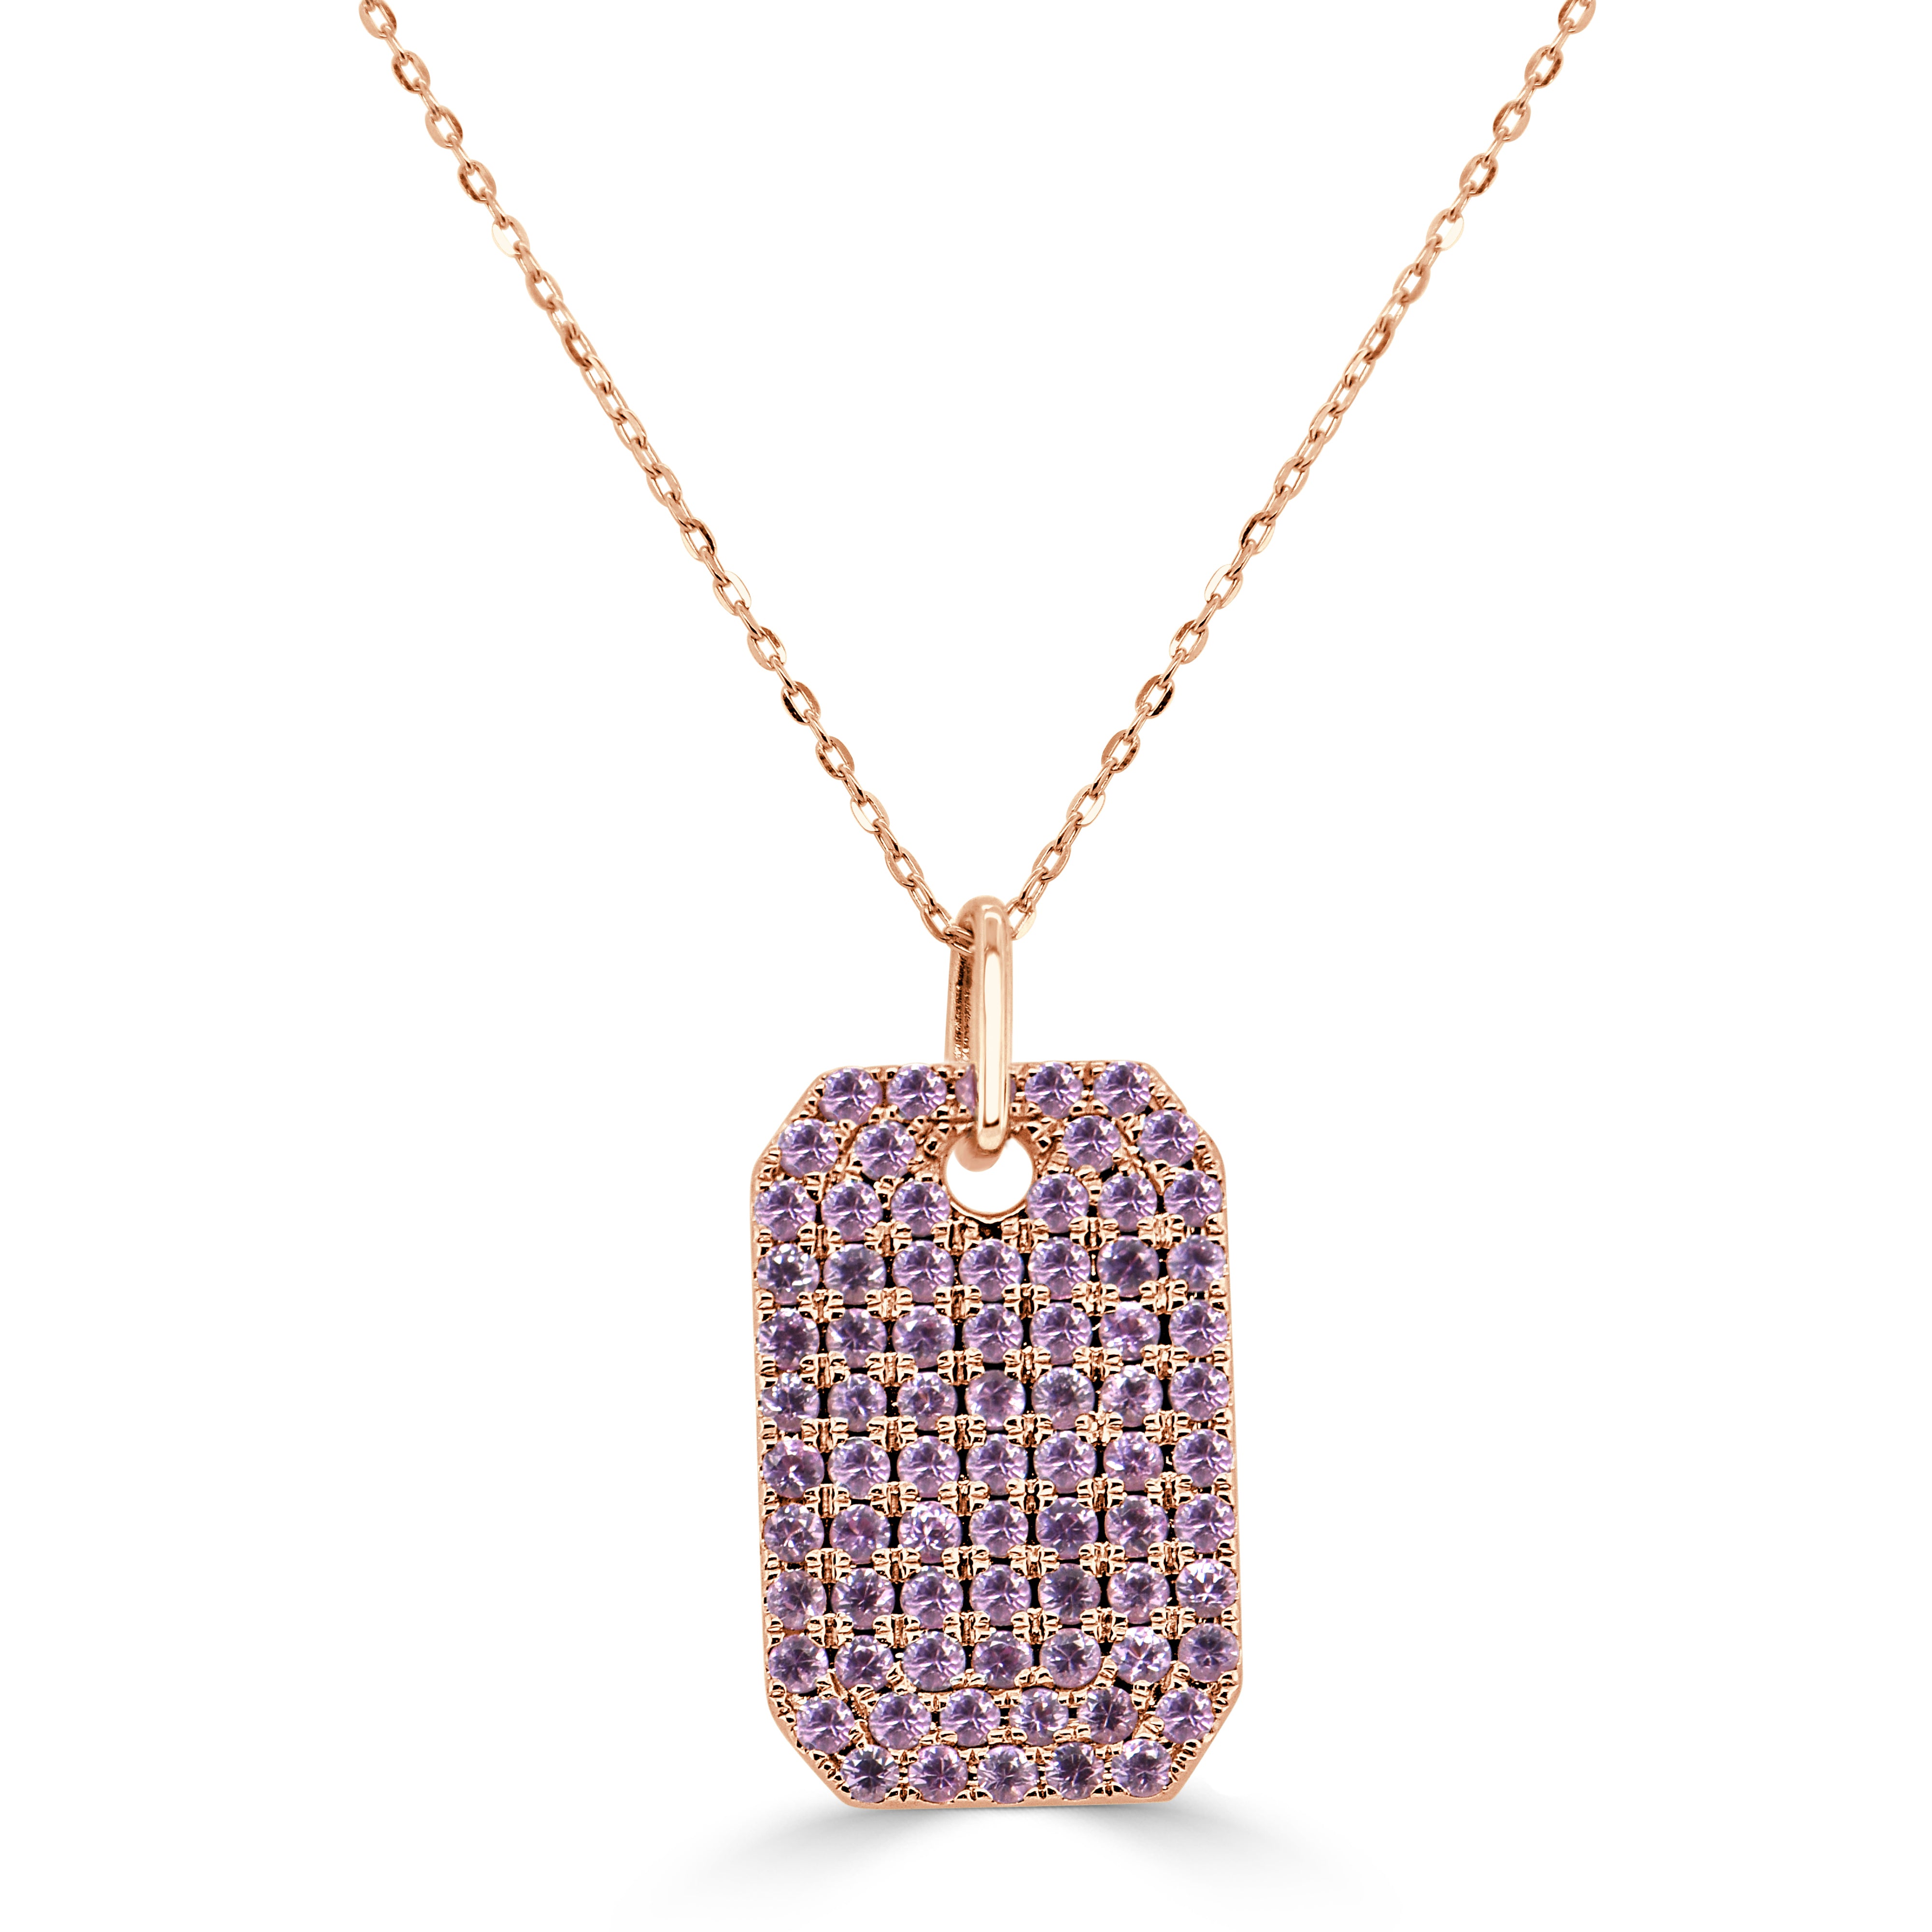 14K Gold & Pink Sapphire Pave Dog Tag Charm Necklace - 1.74ct